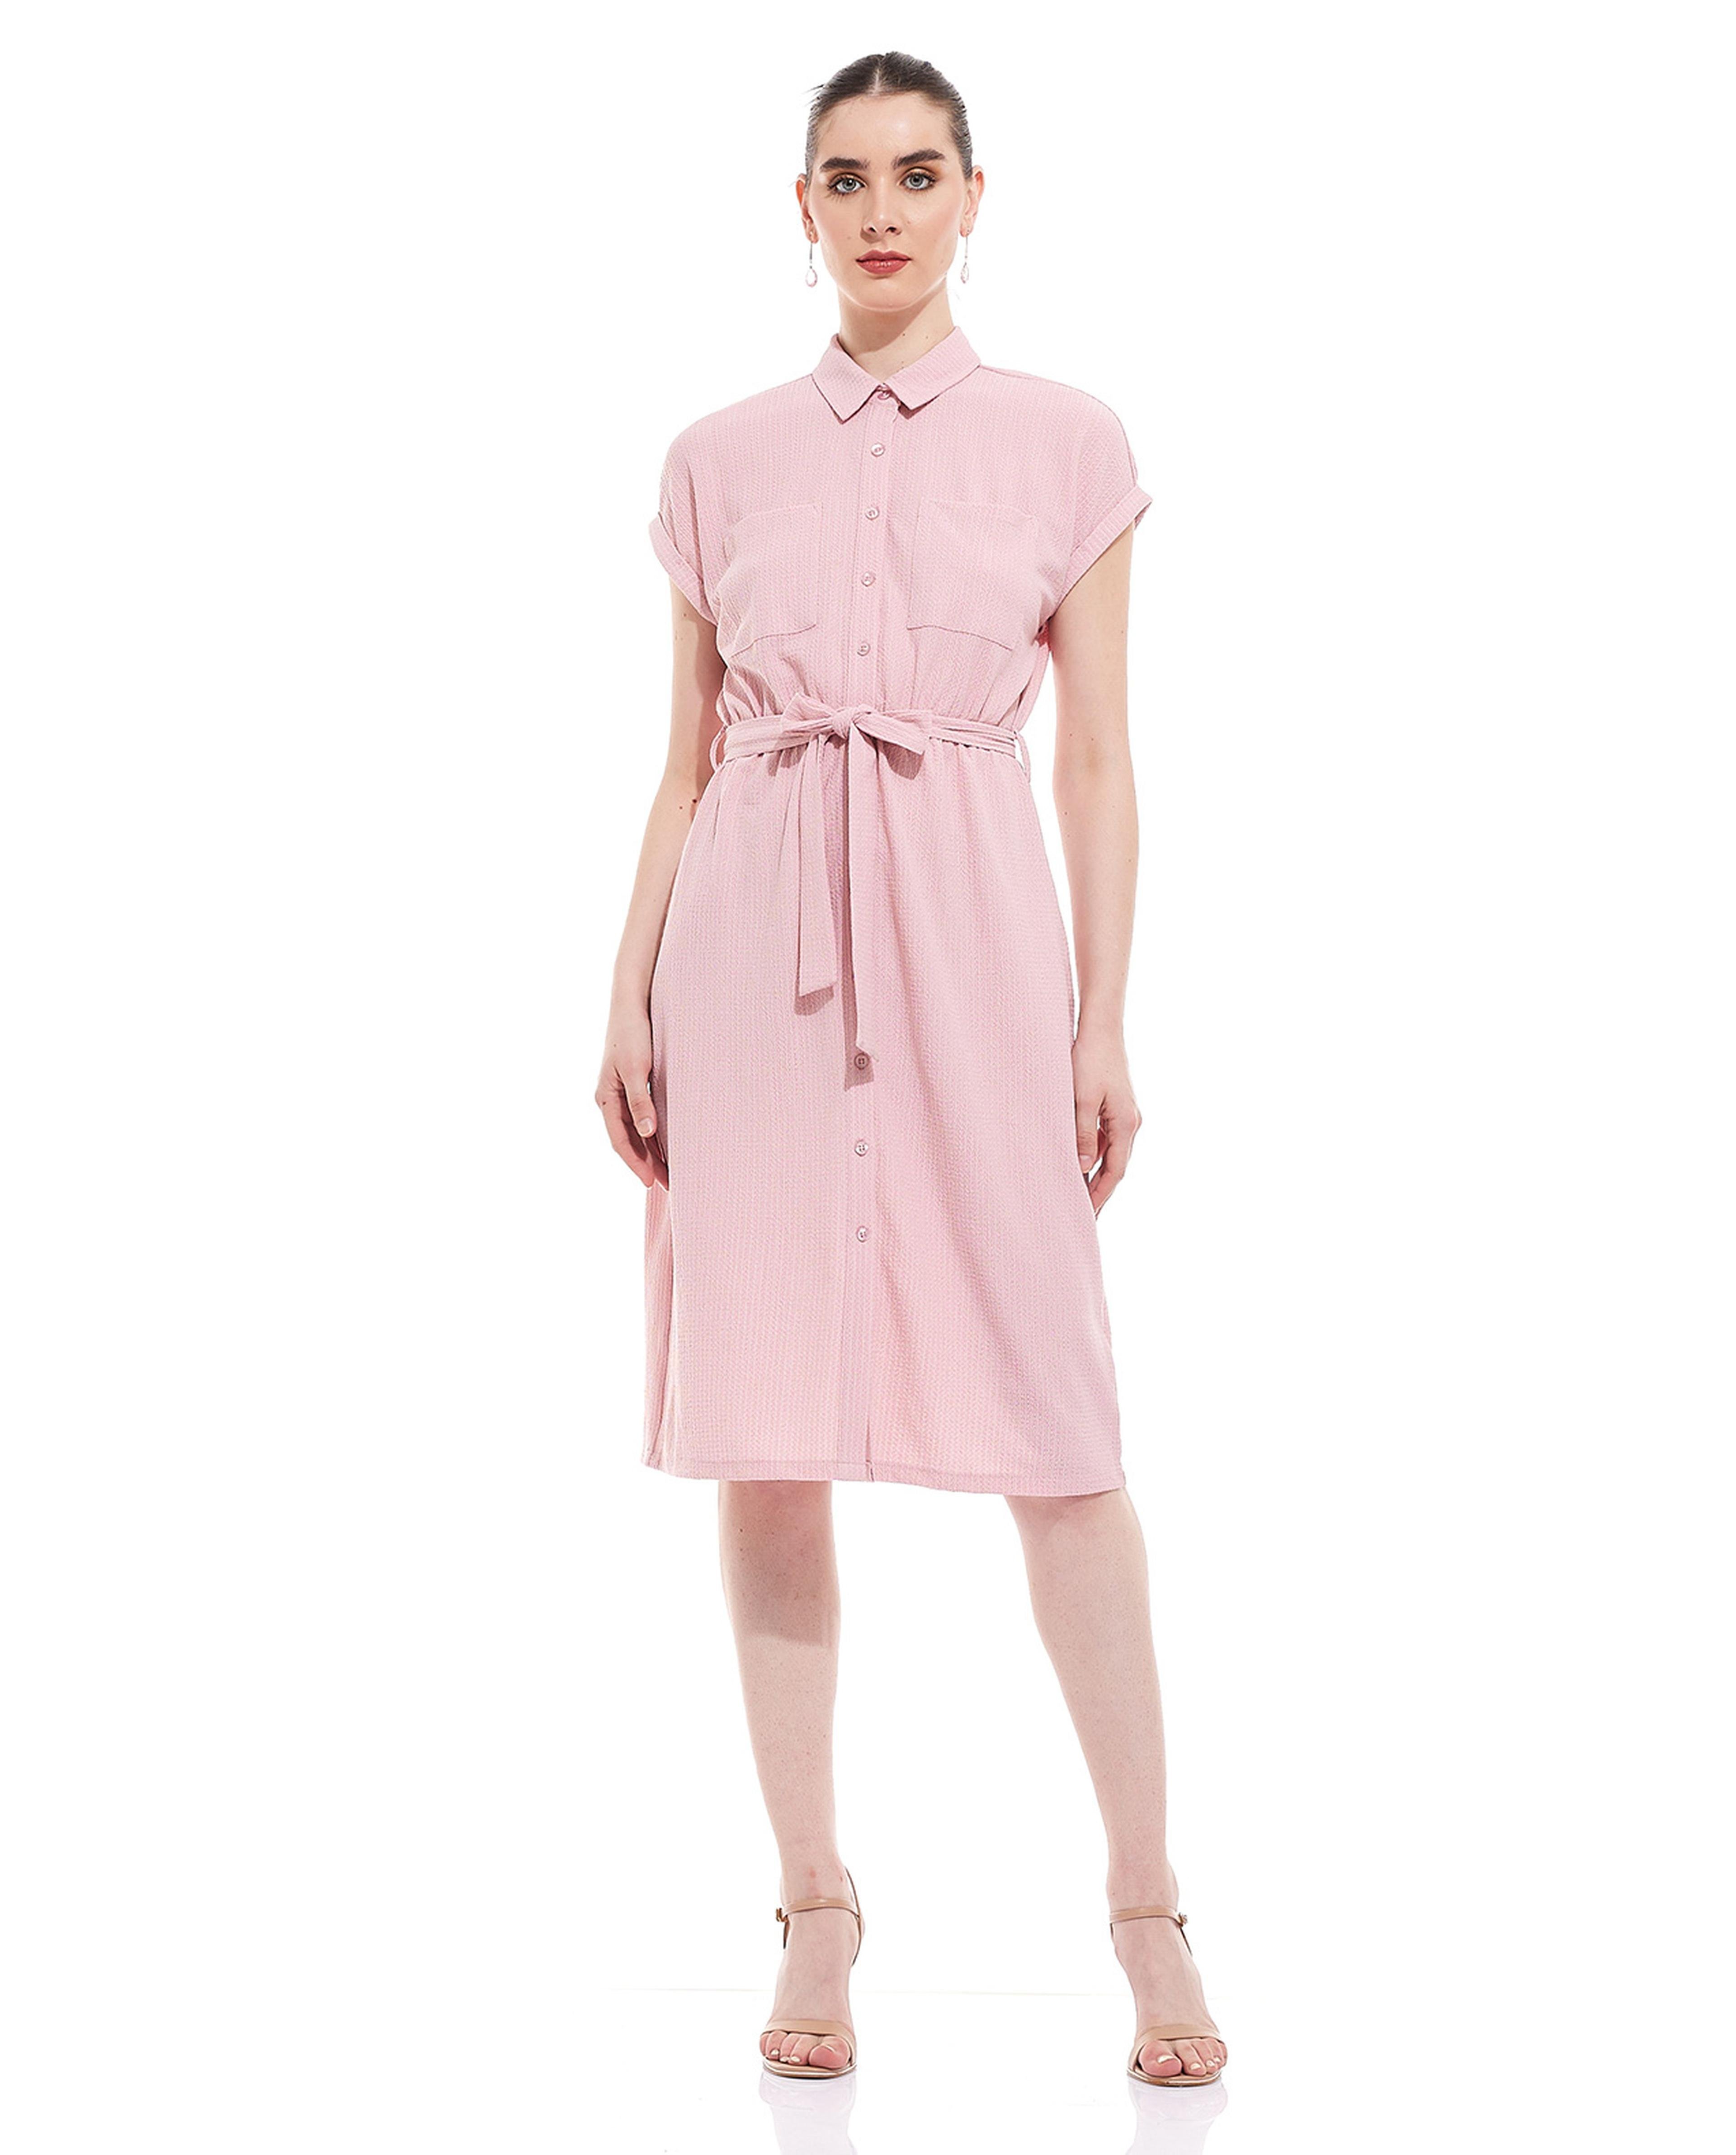 Belted Shirt Dress with Short Sleeves